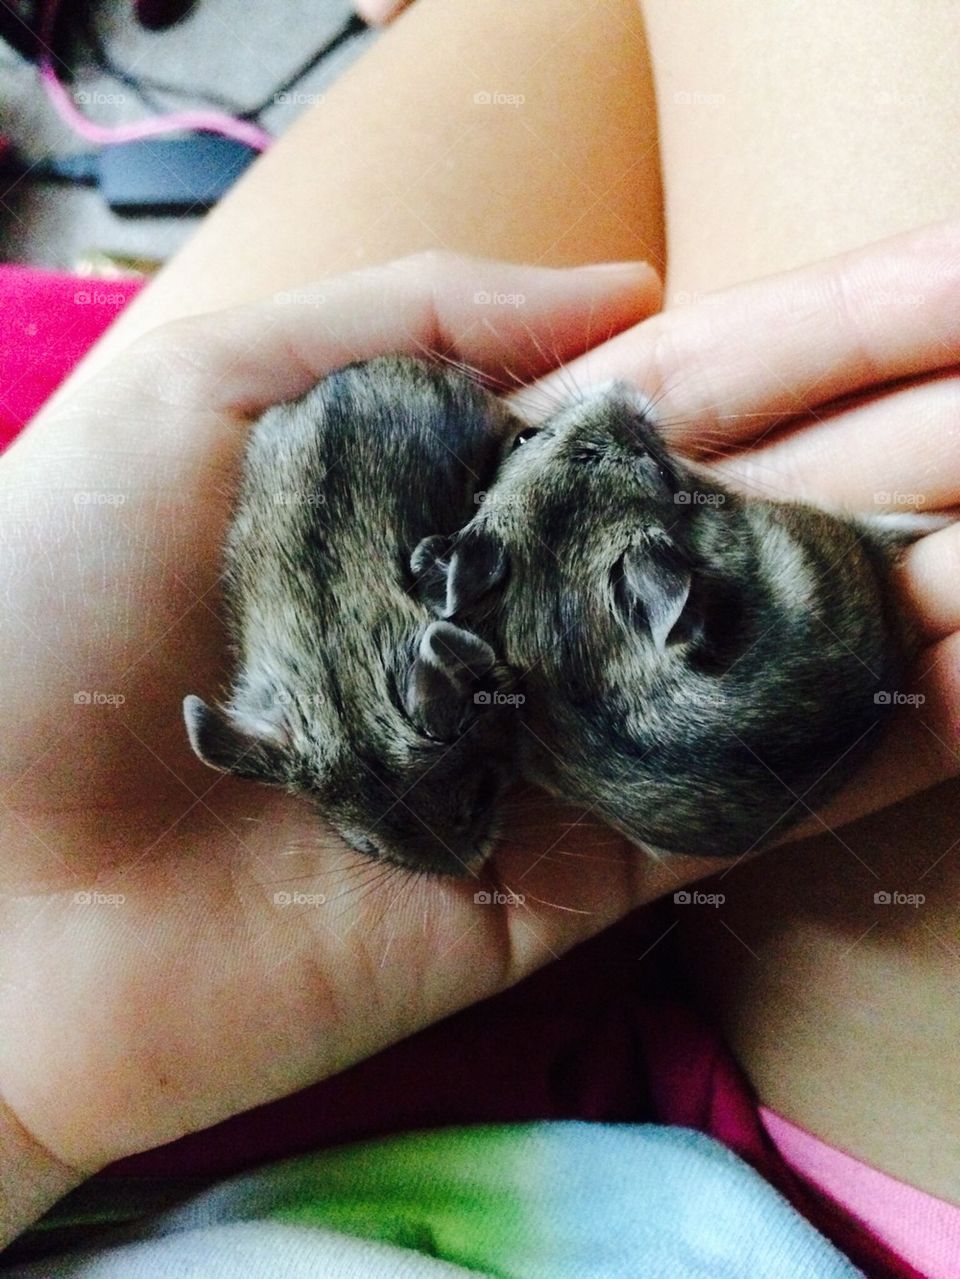 Chinese dwarf hamsters